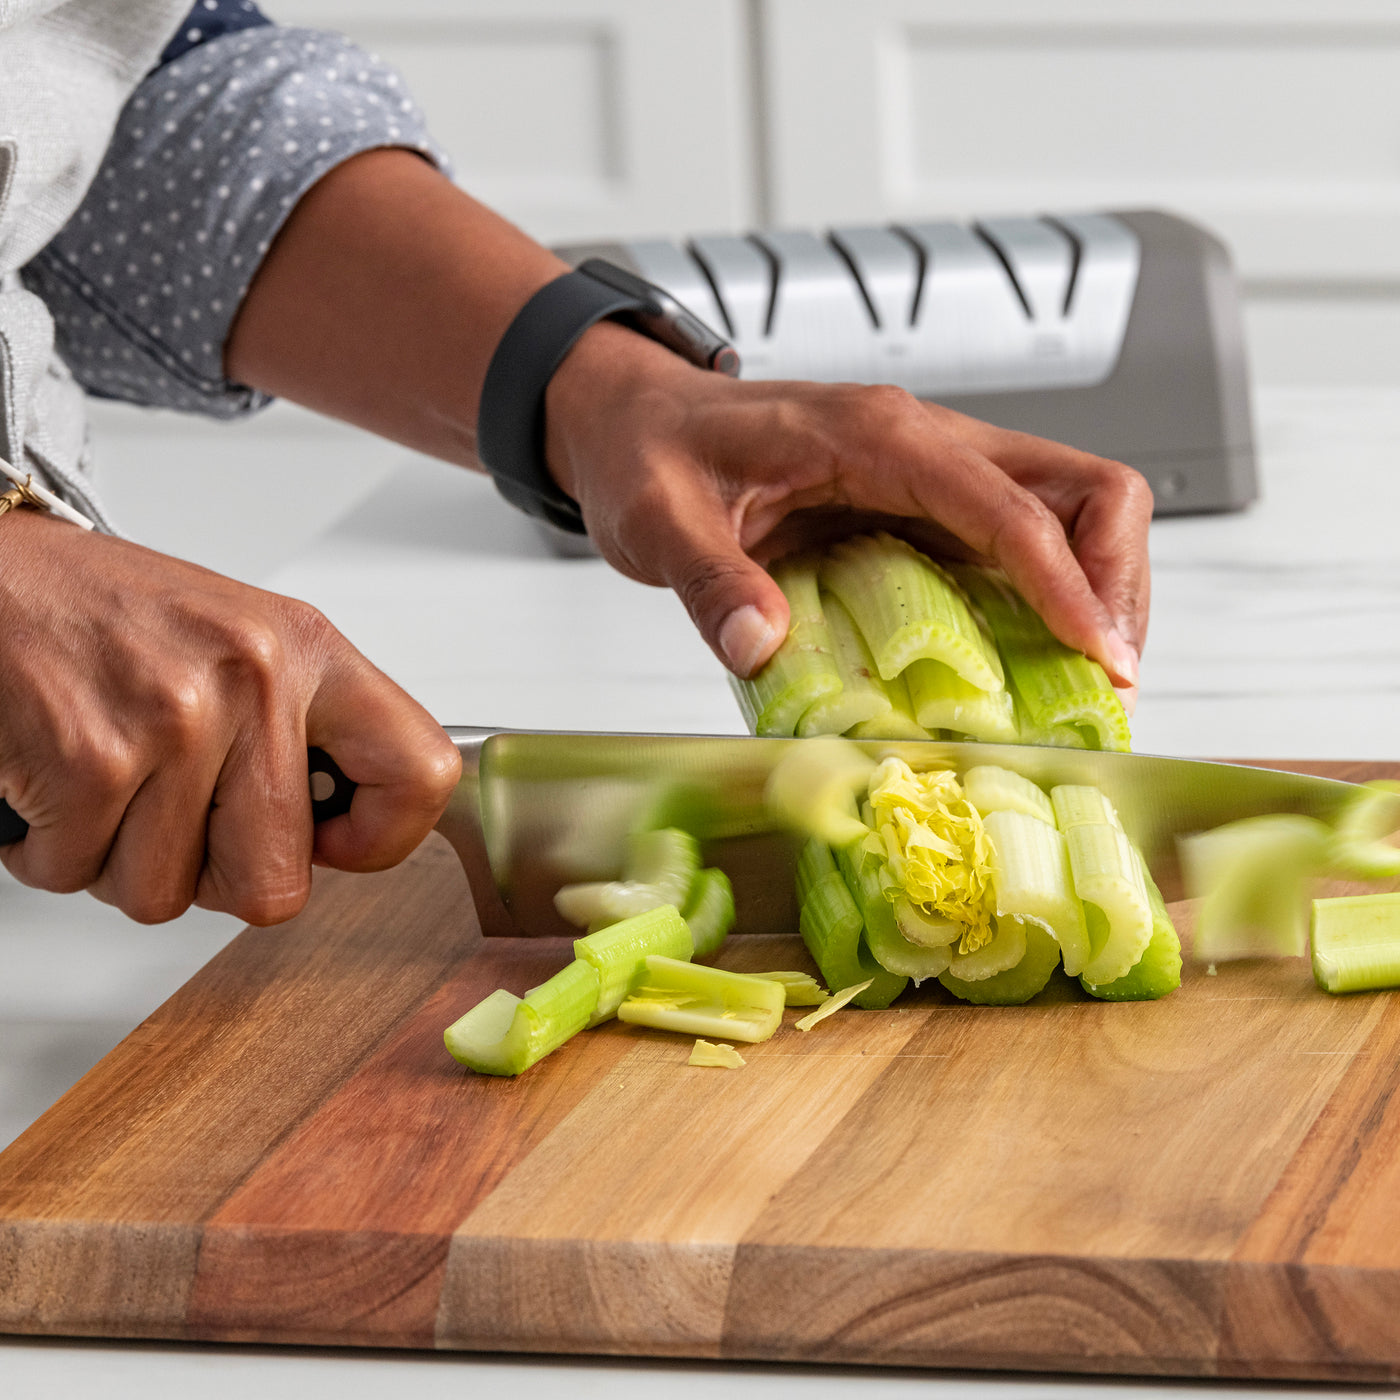 Chef'sChoice brings new technology to knife sharpening introducing  Rechargeable DC Electric Knife Sharpeners. Designed with a smaller  footprint than other electric sharpeners, it still has all the sharpening  power Chef'sChoice is known